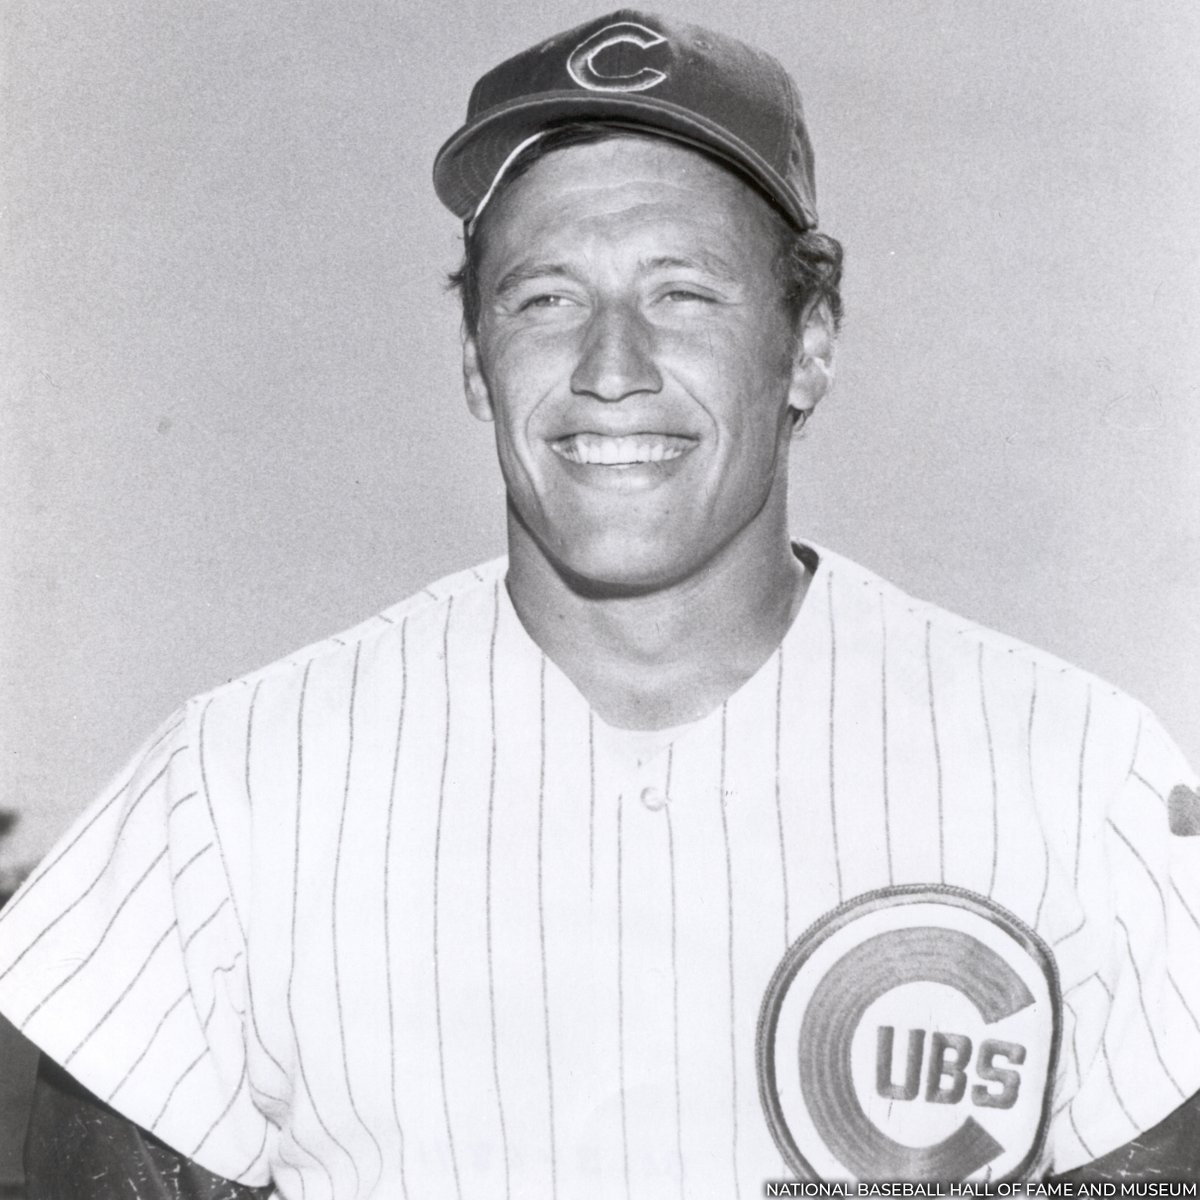 The Hall of Fame remembers two-time All-Star Ken Holtzman, who passed away Sunday. Holtzman pitched with five World Series champions over his 15-year career while throwing two no-hitters for the Cubs.